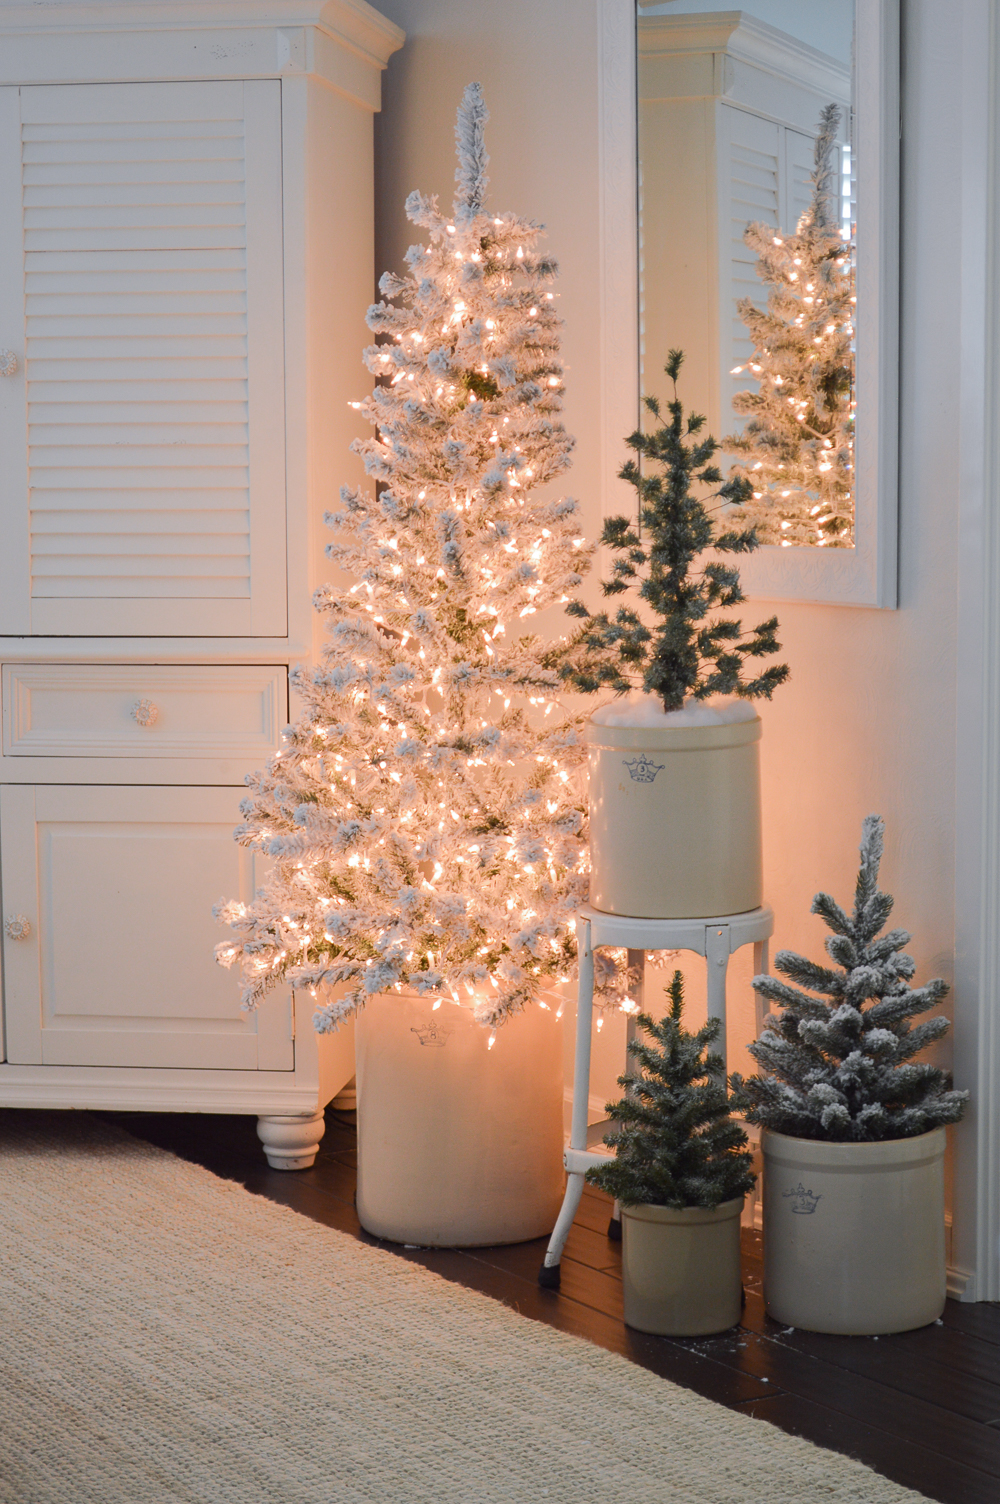 My $30 Flocked Christmas Tree Details - Affordable holiday decorating ideas.